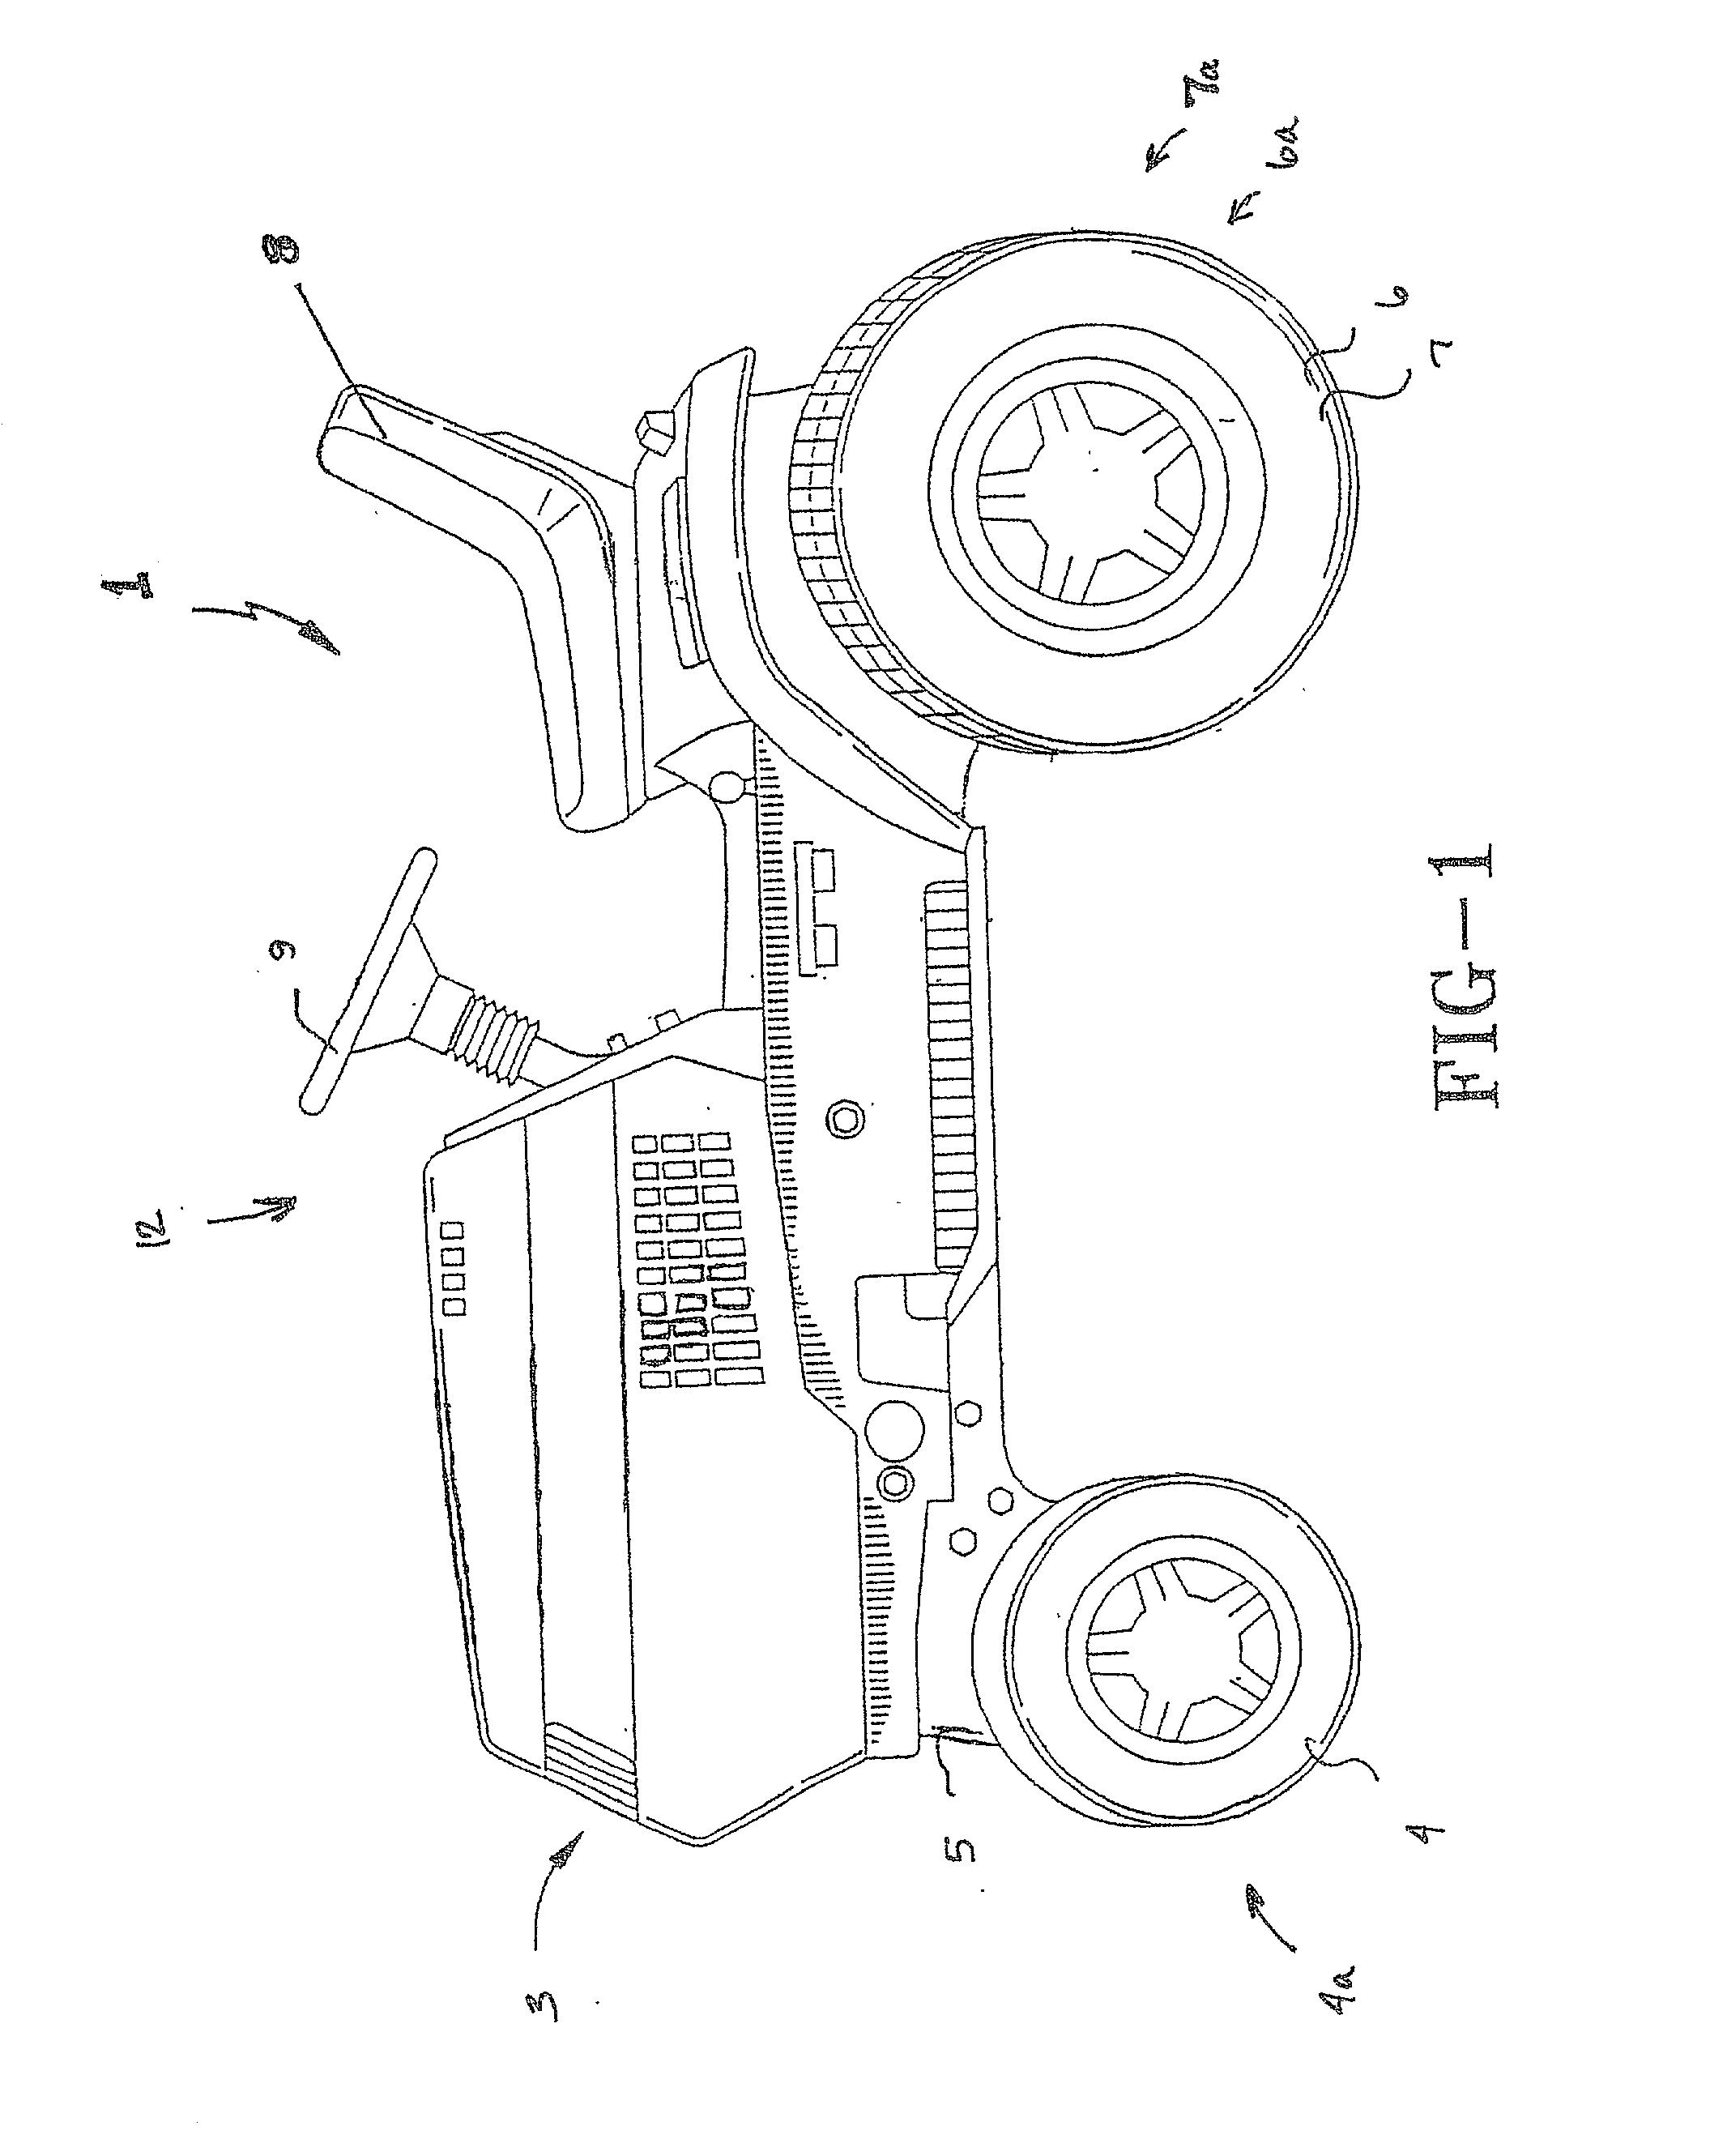 ZTR vehicle with a one-pump two-motor mechanism